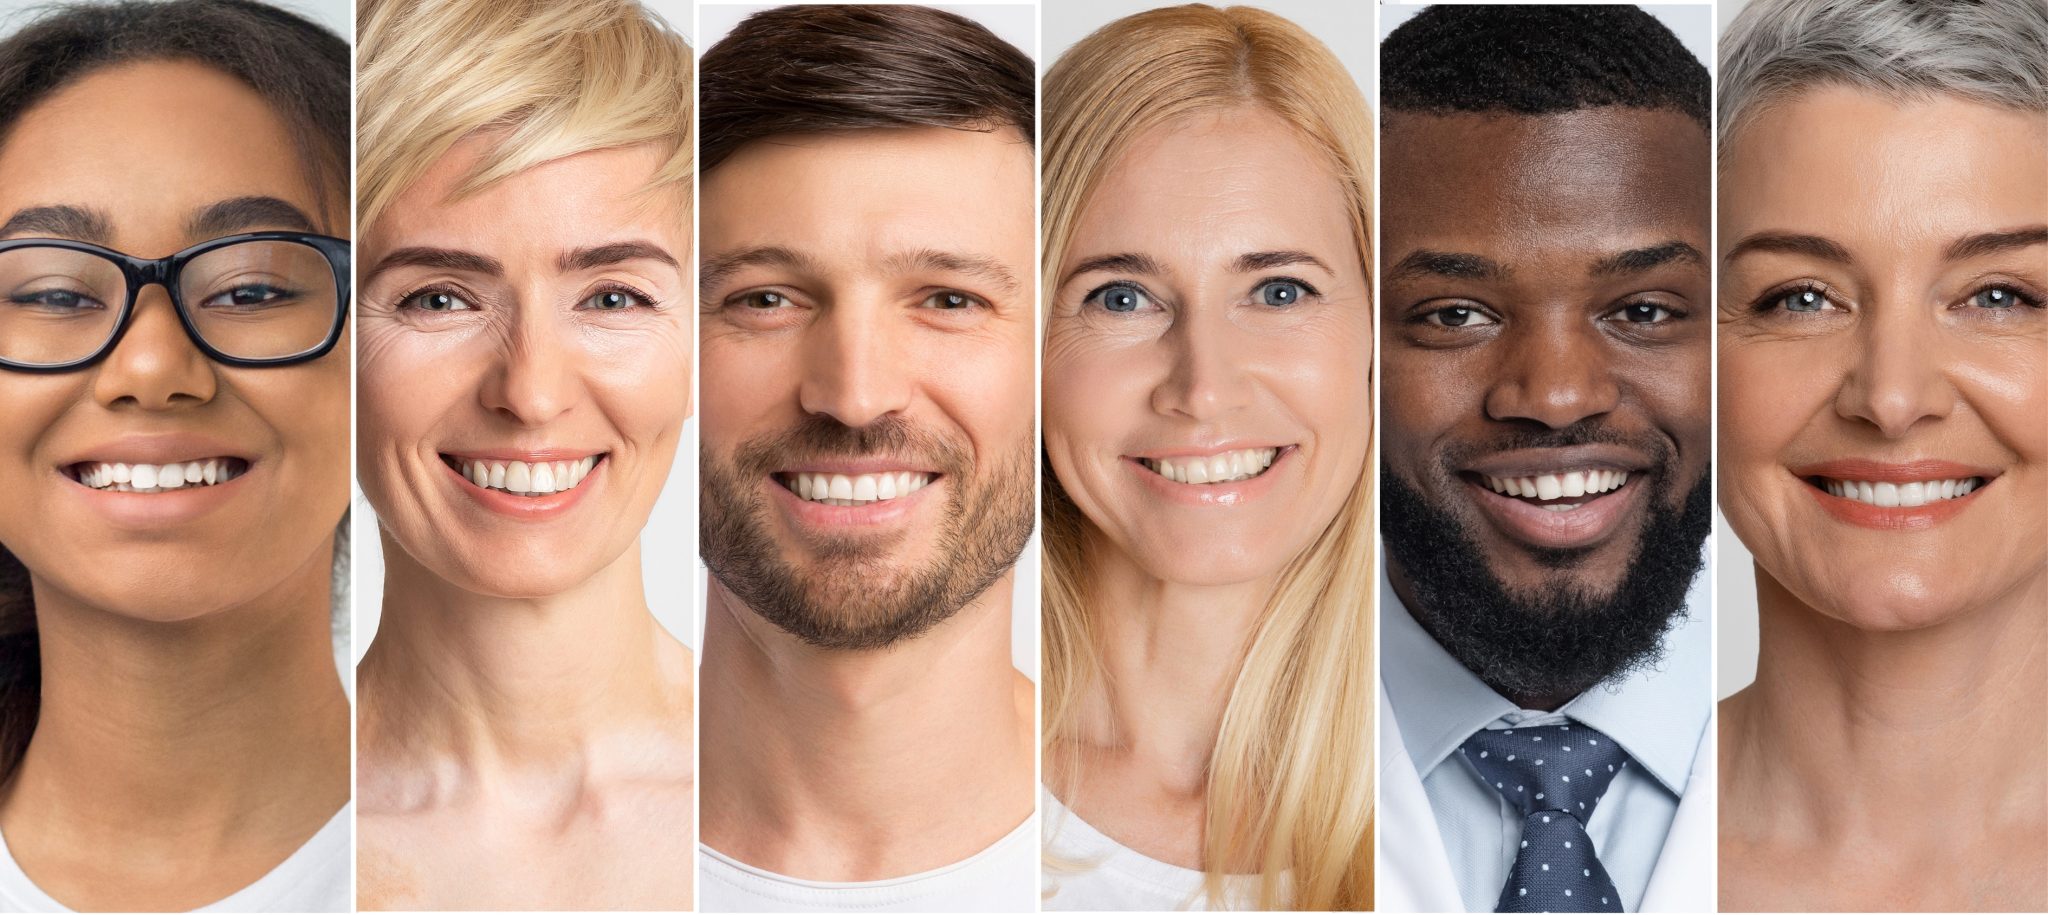 Smiling faces of people of different genders, ages, ethnicities who are clients of The Source of Wellness